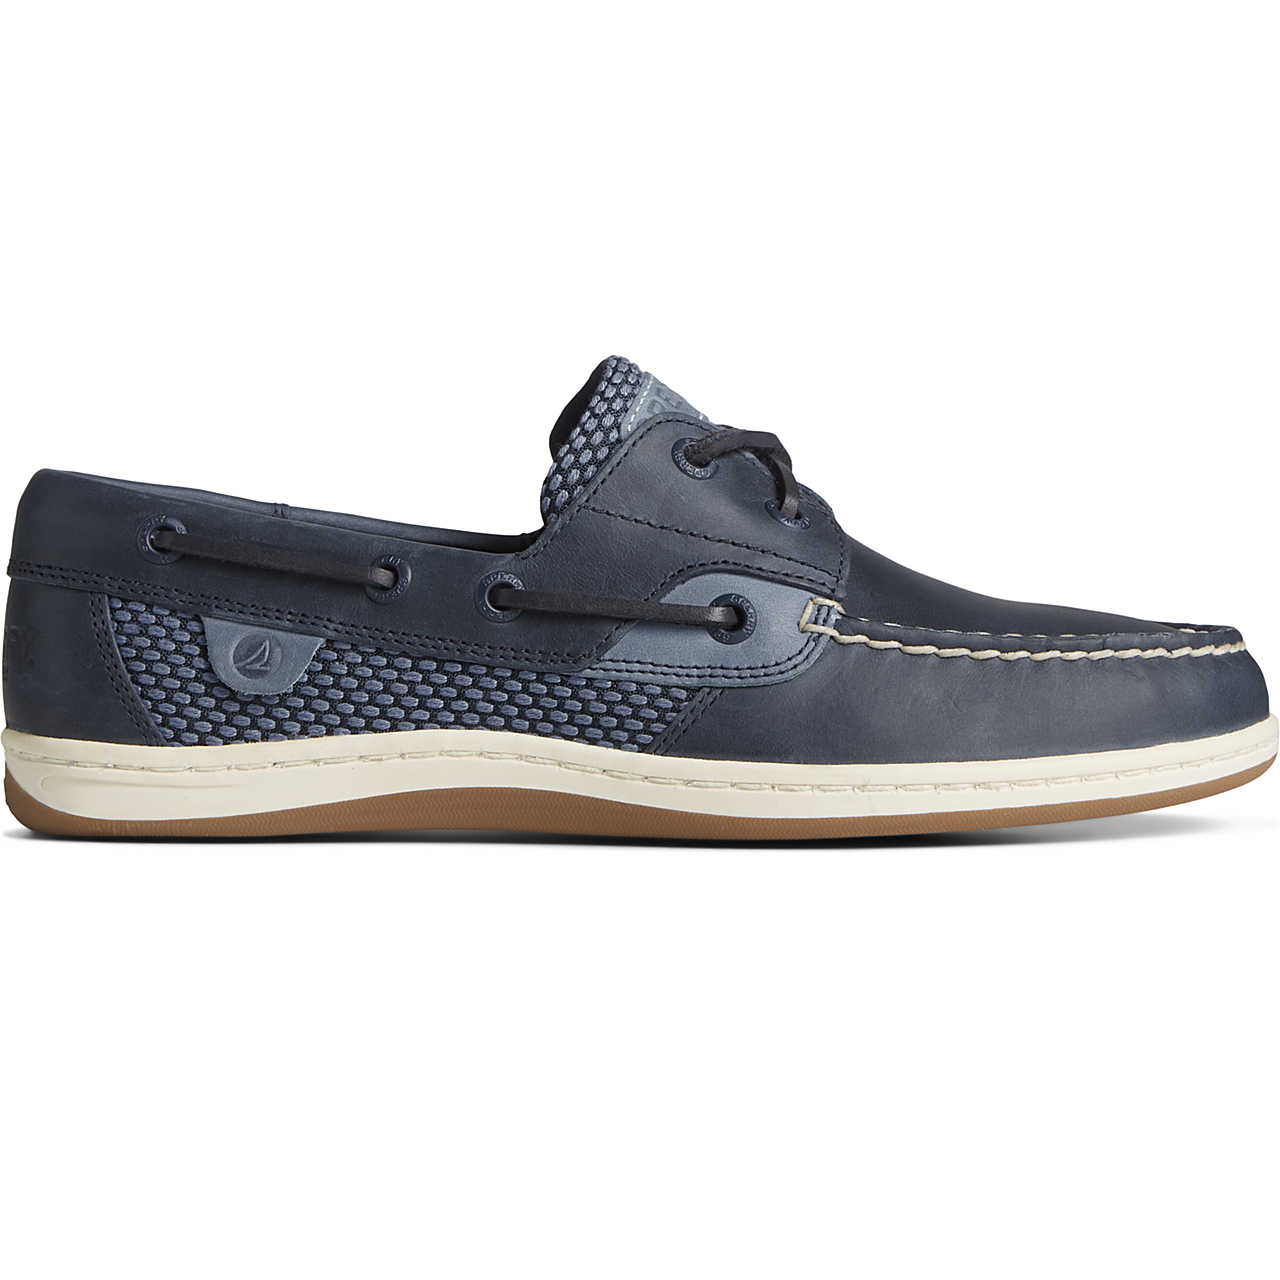 Women's Koifish Two-Tone Boat Shoe - Women's Boat Shoes | Sperry